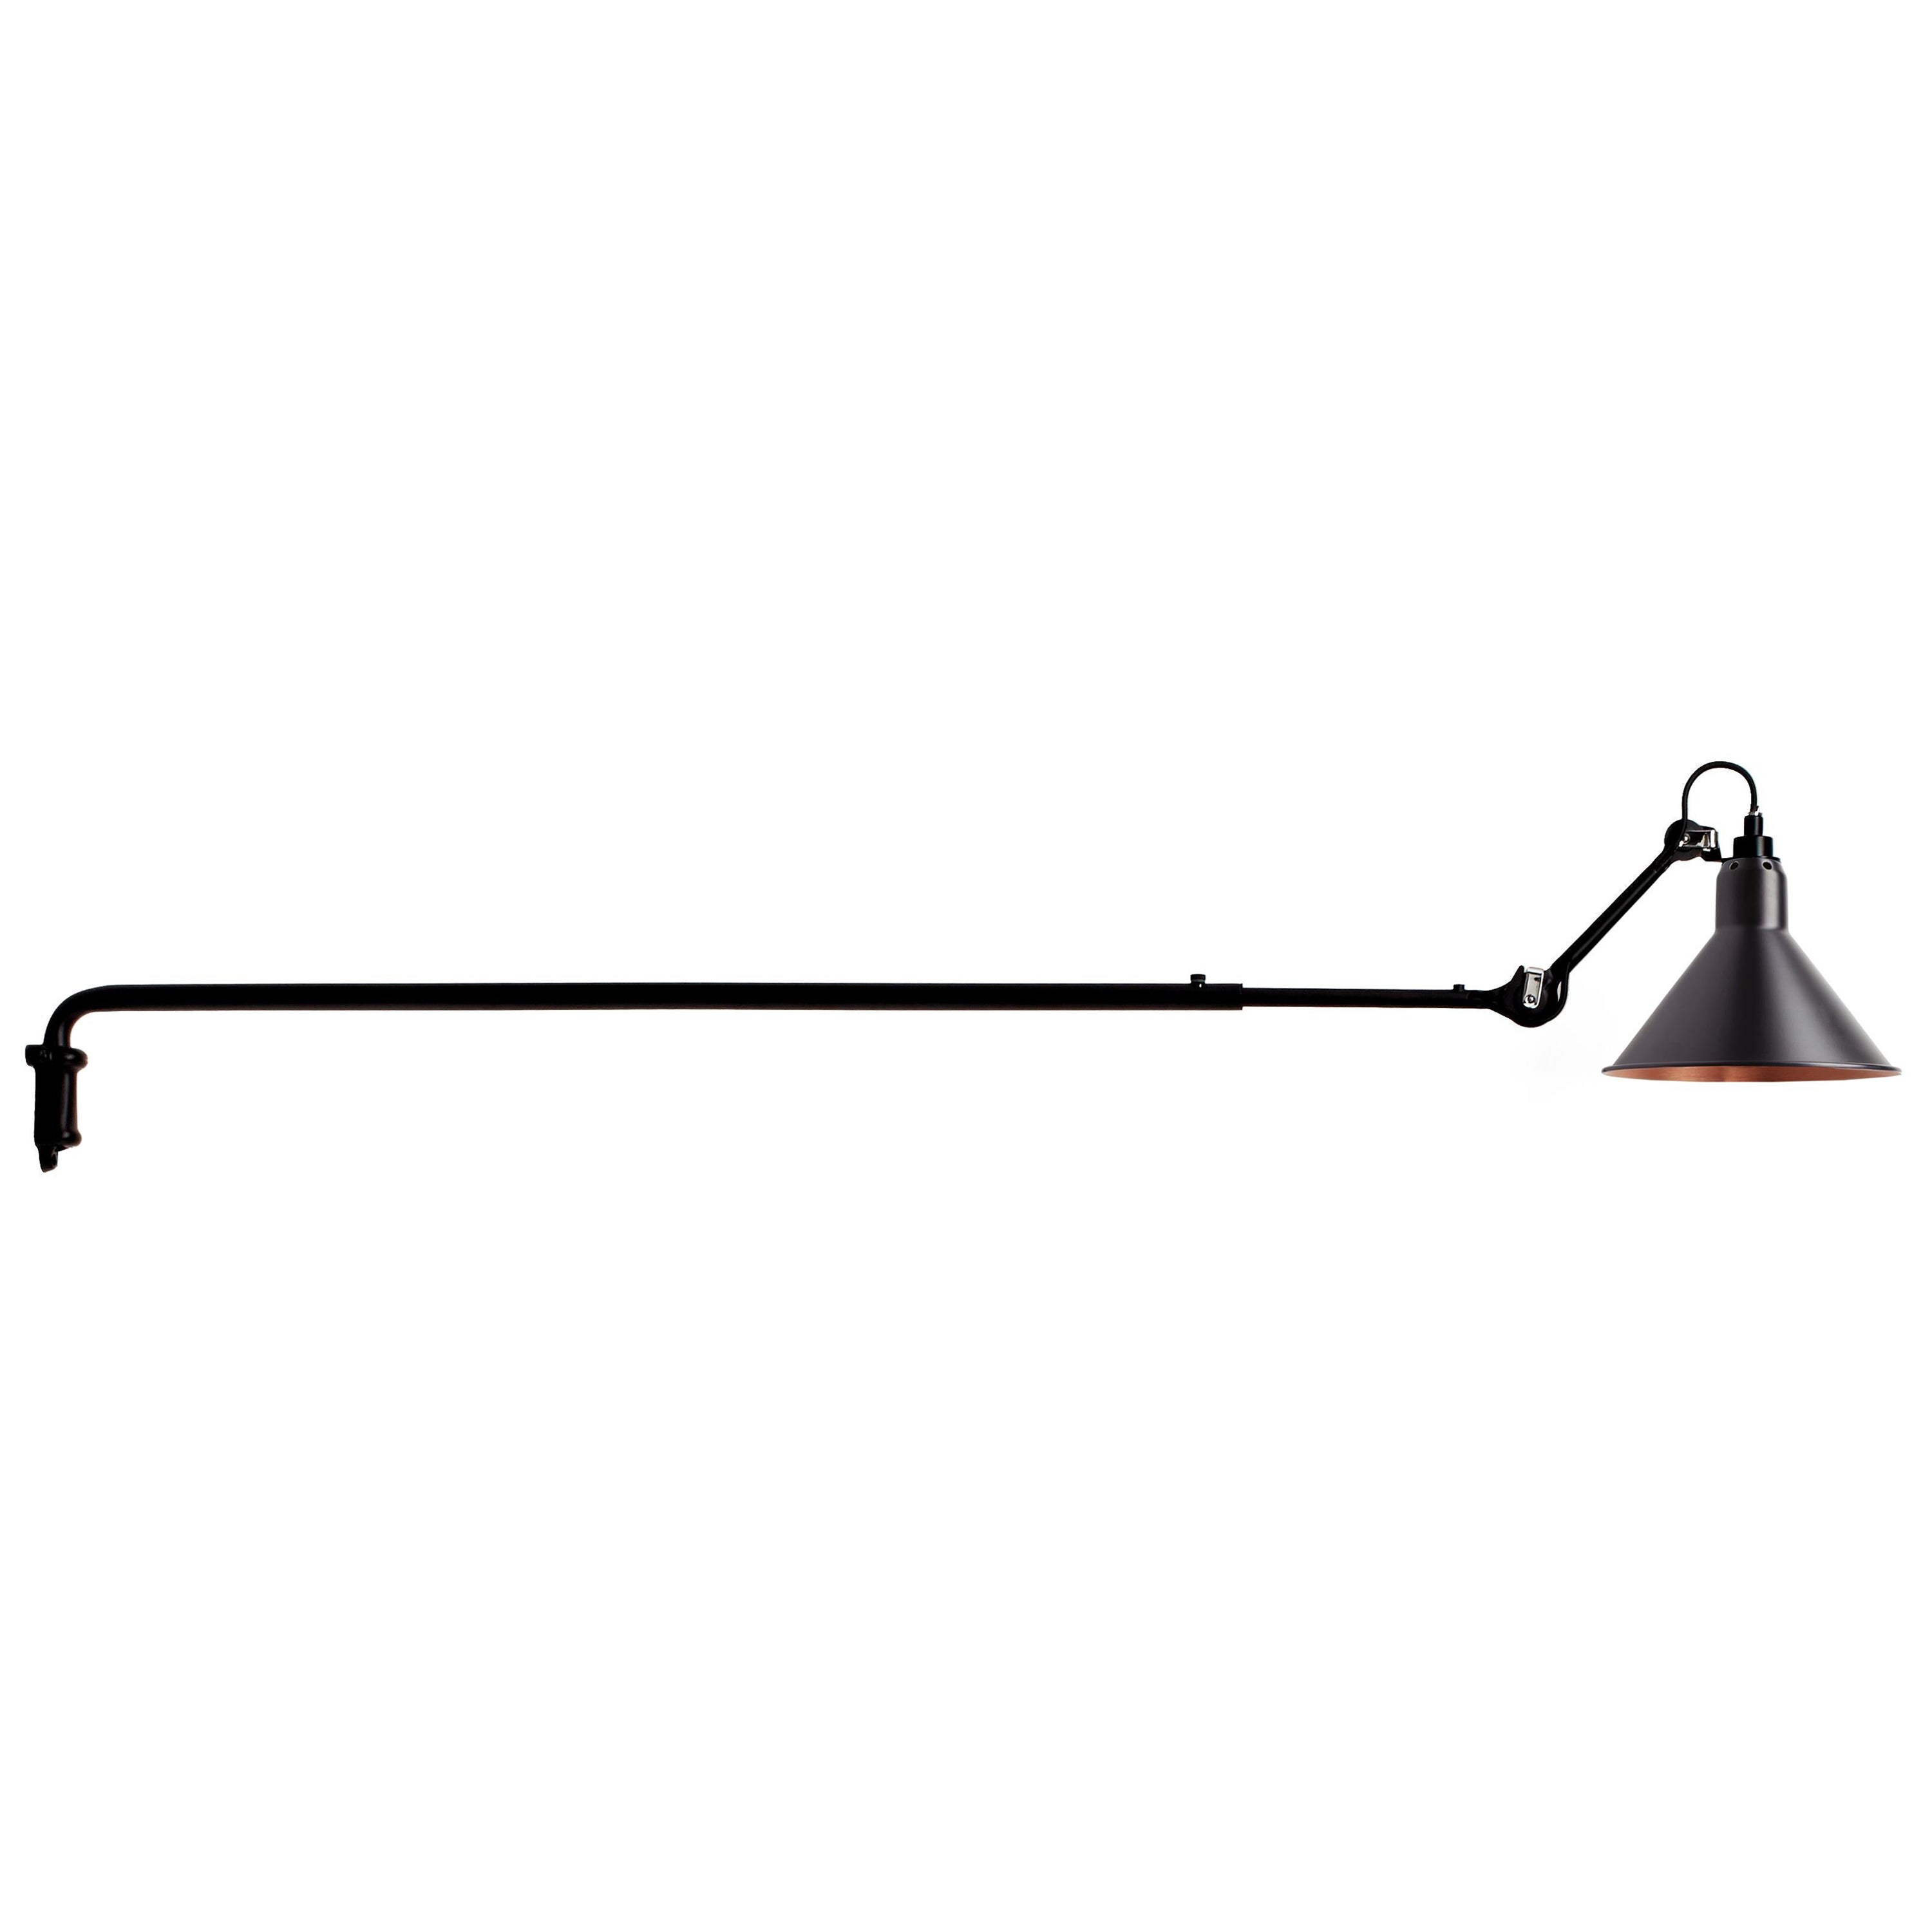 DCW Editions La Lampe Gras N°213 Wall Lamp in Black Arm and Black Copper Shade